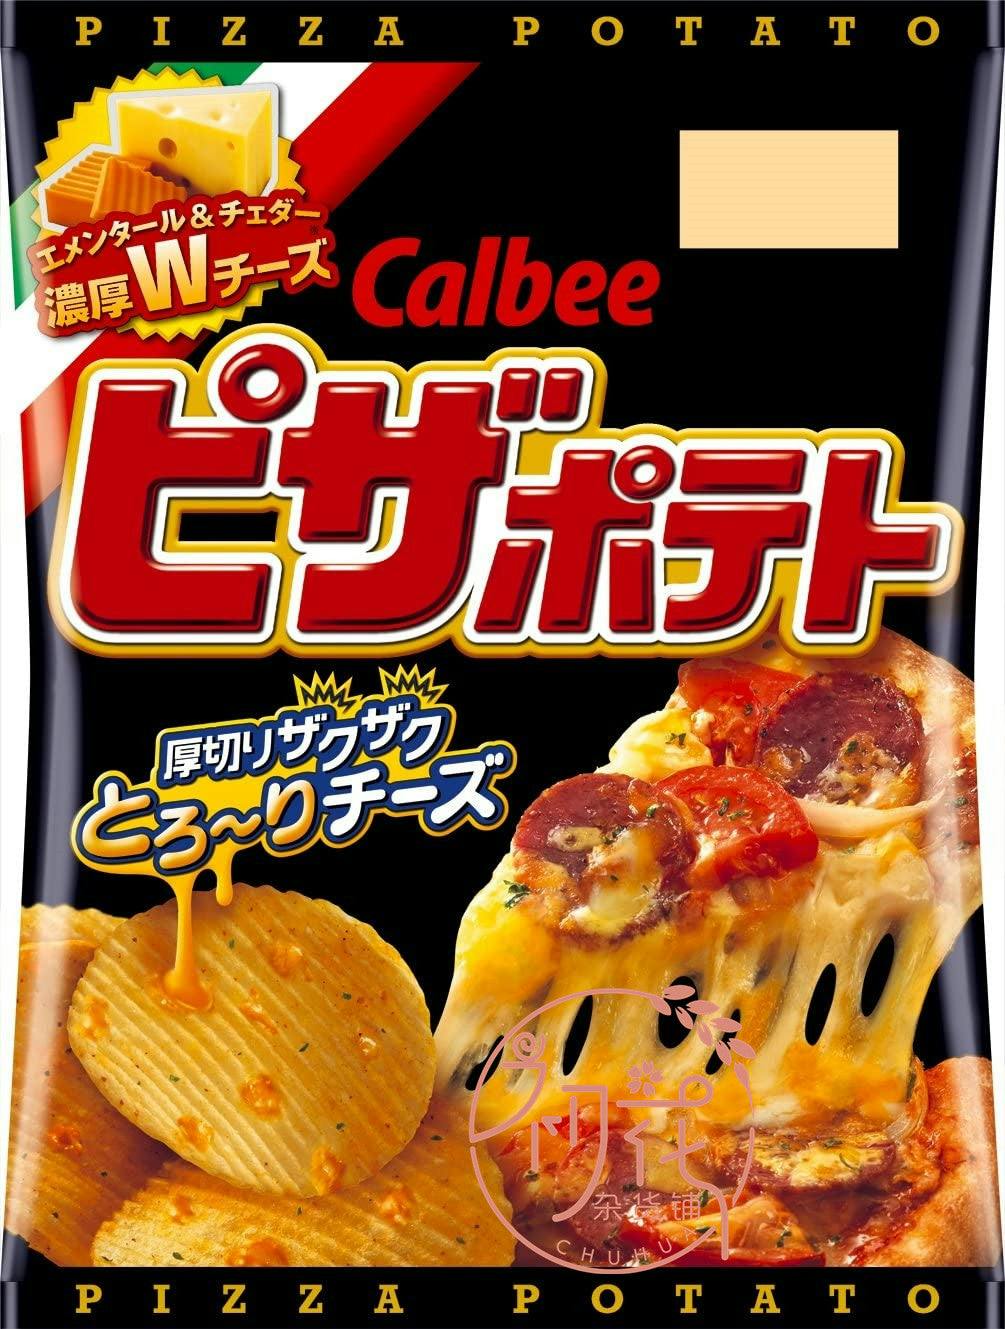 Pizza-Flavored Potato Chips w/ Melted Cheese